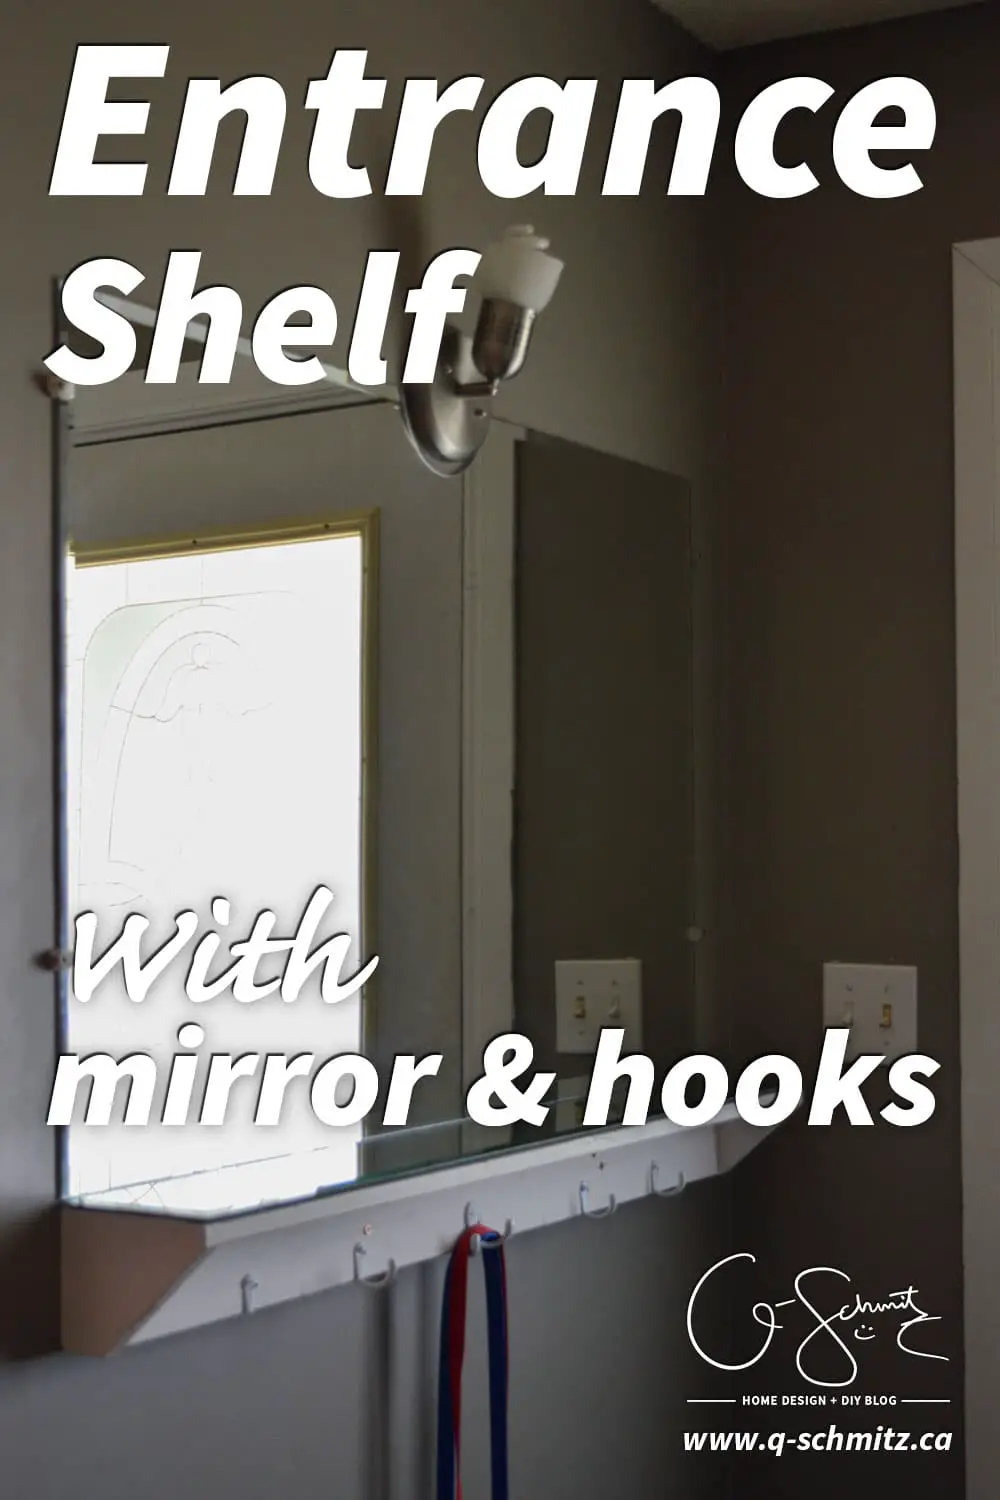 An easy DIY project to add storage & organization to your entryway! To recreate this entrance mirror and shelf, you'll need leftover wood, a builder-grade mirror, and some hooks.